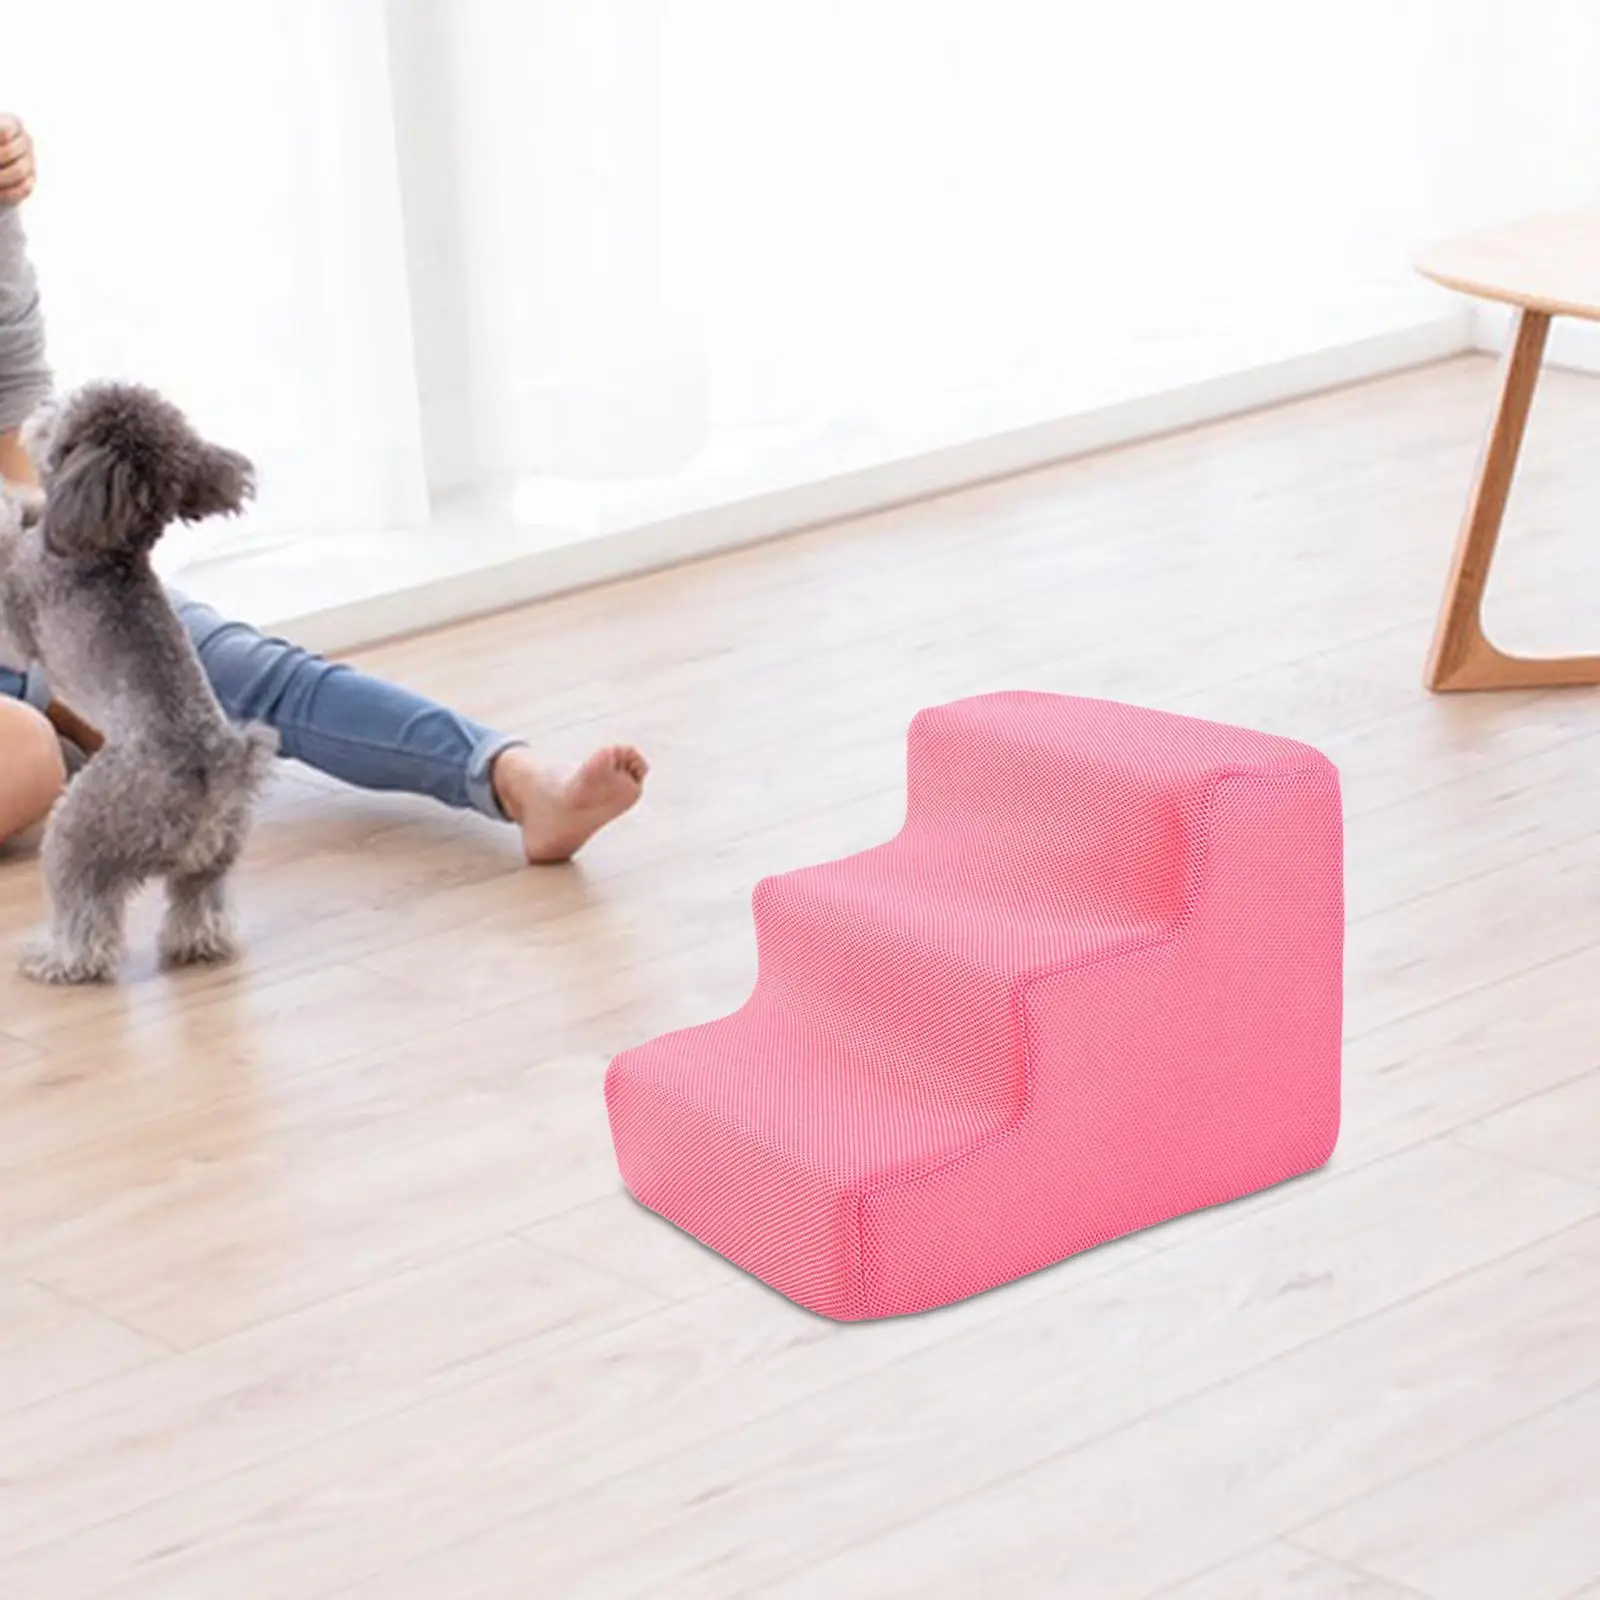 Pet Stairs High Density Pet Steps Ladder Balanced Pet Steps Dog Steps for Car Couch Small Dogs and Cats High Beds Climbing